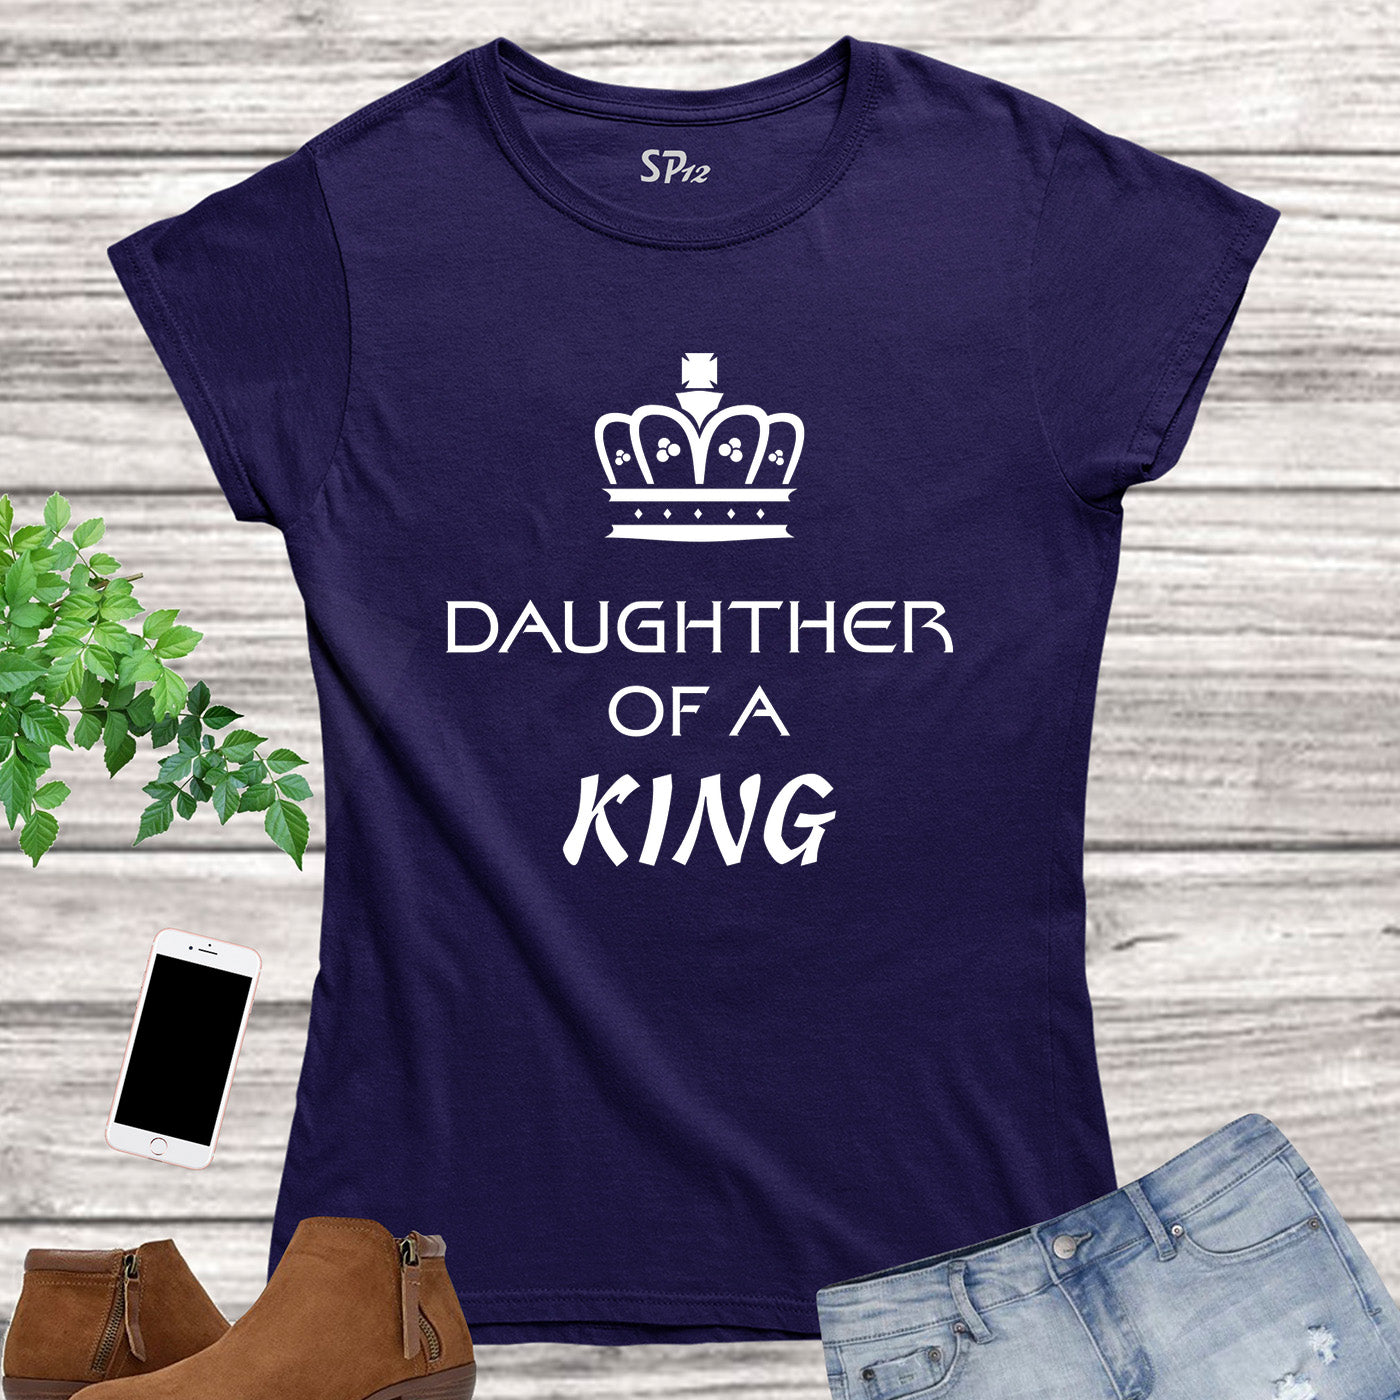 Religious Women T Shirt Daughter of a King Royal tshirts Tee